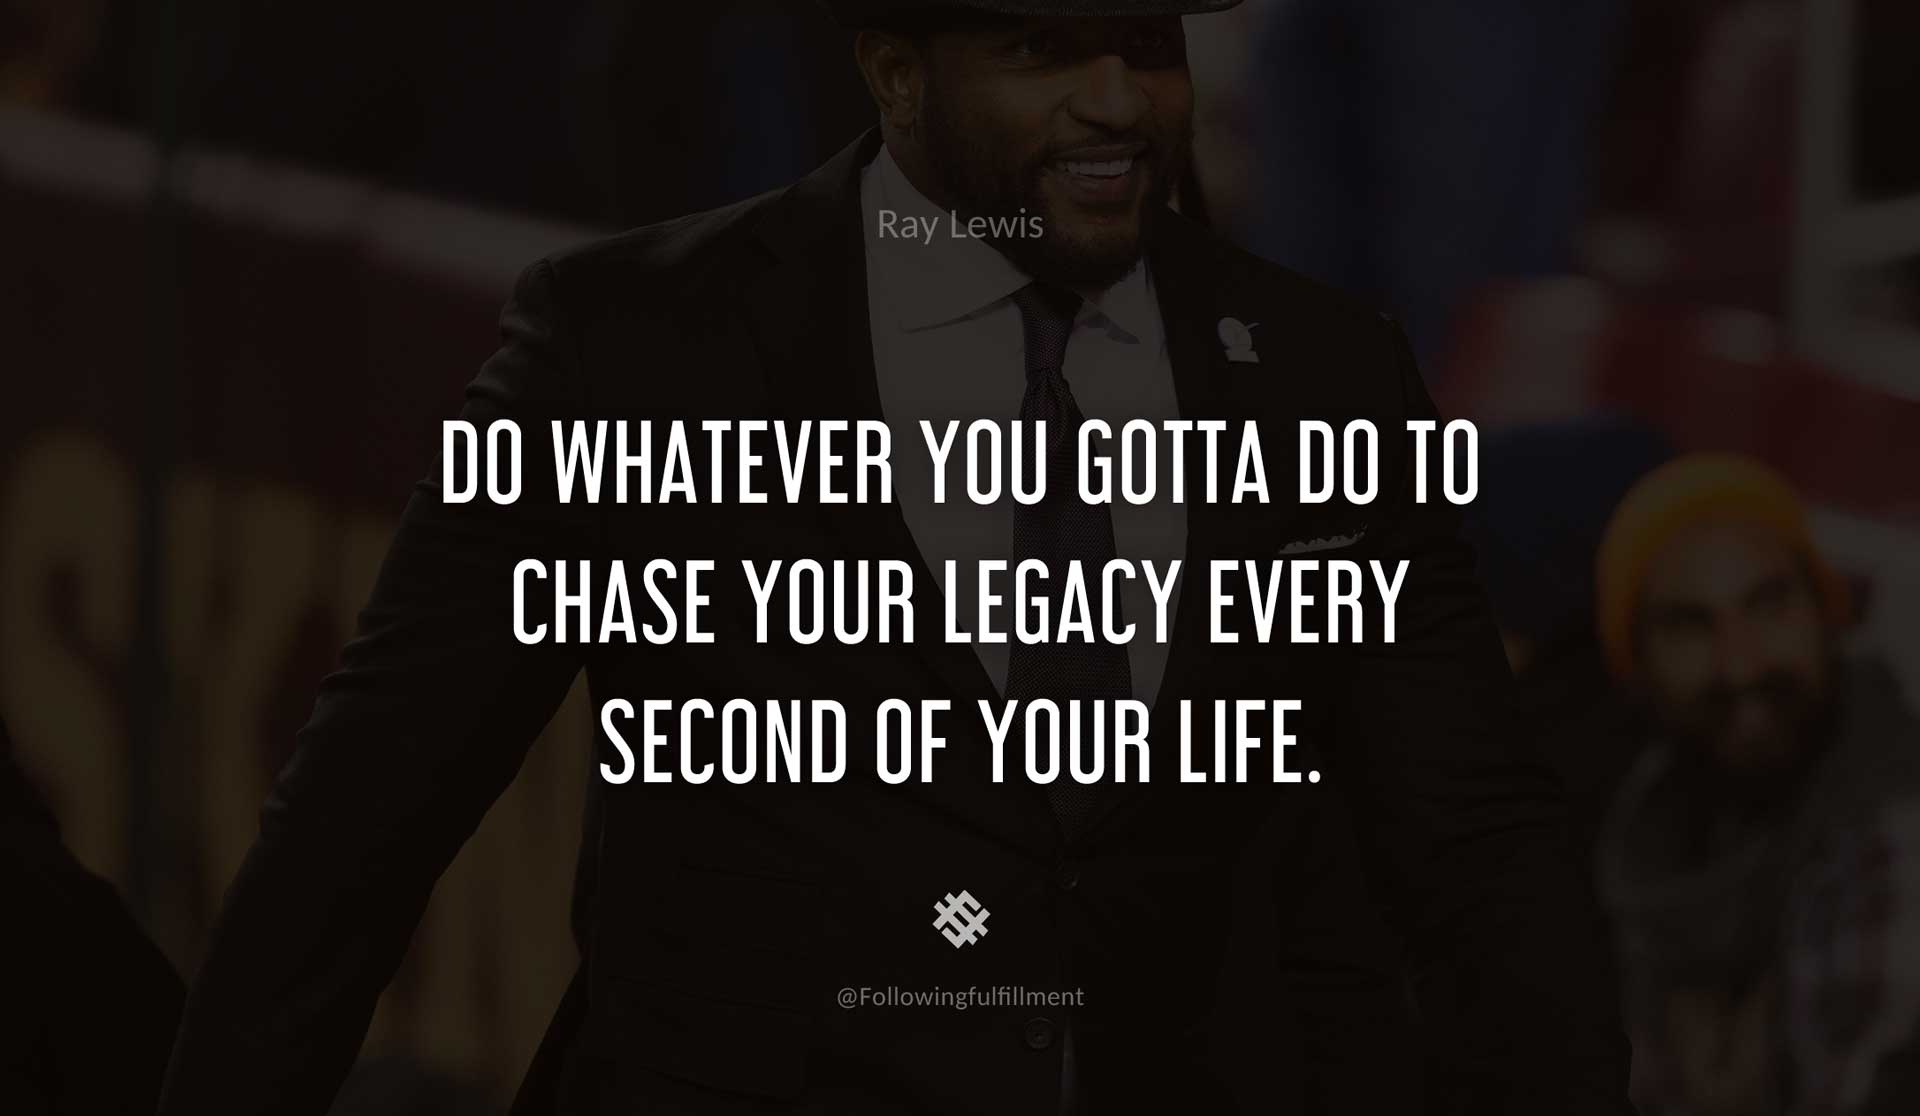 Do-whatever-you-gotta-do-to-chase-your-legacy-every-second-of-your-life.-RAY-LEWIS-Quote.jpg